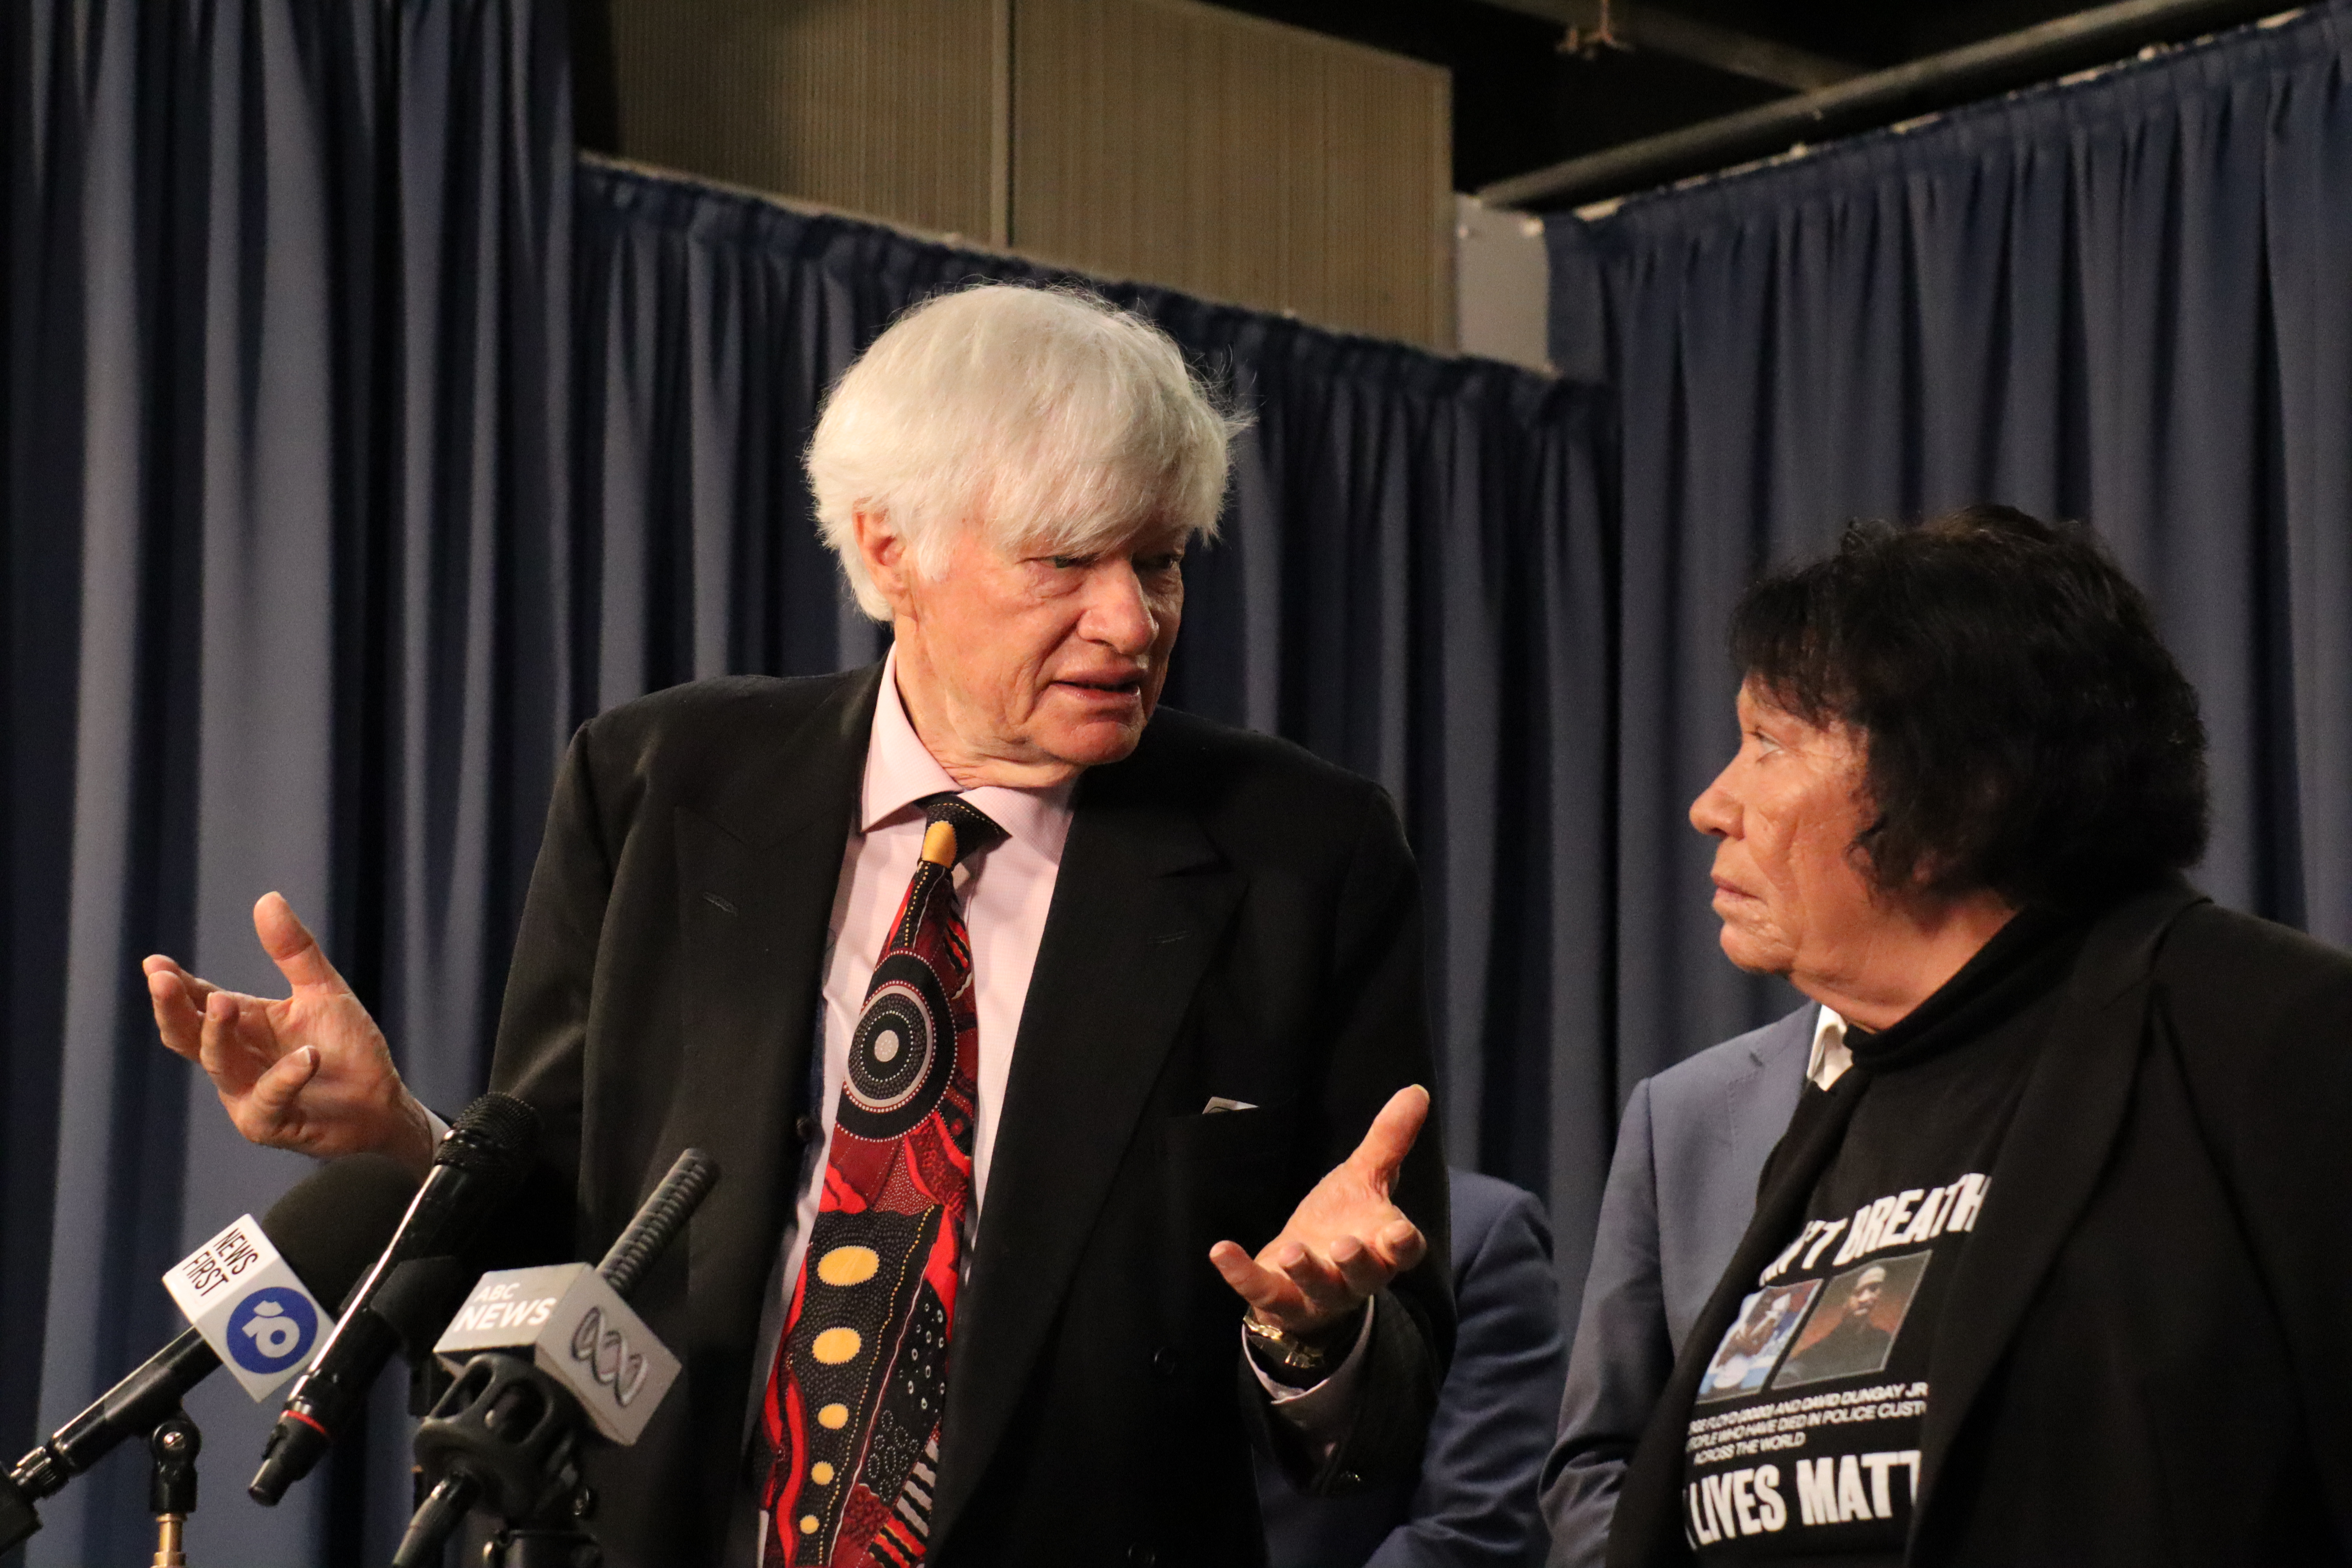 Geoffrey Robertson explains the issues underlying the case